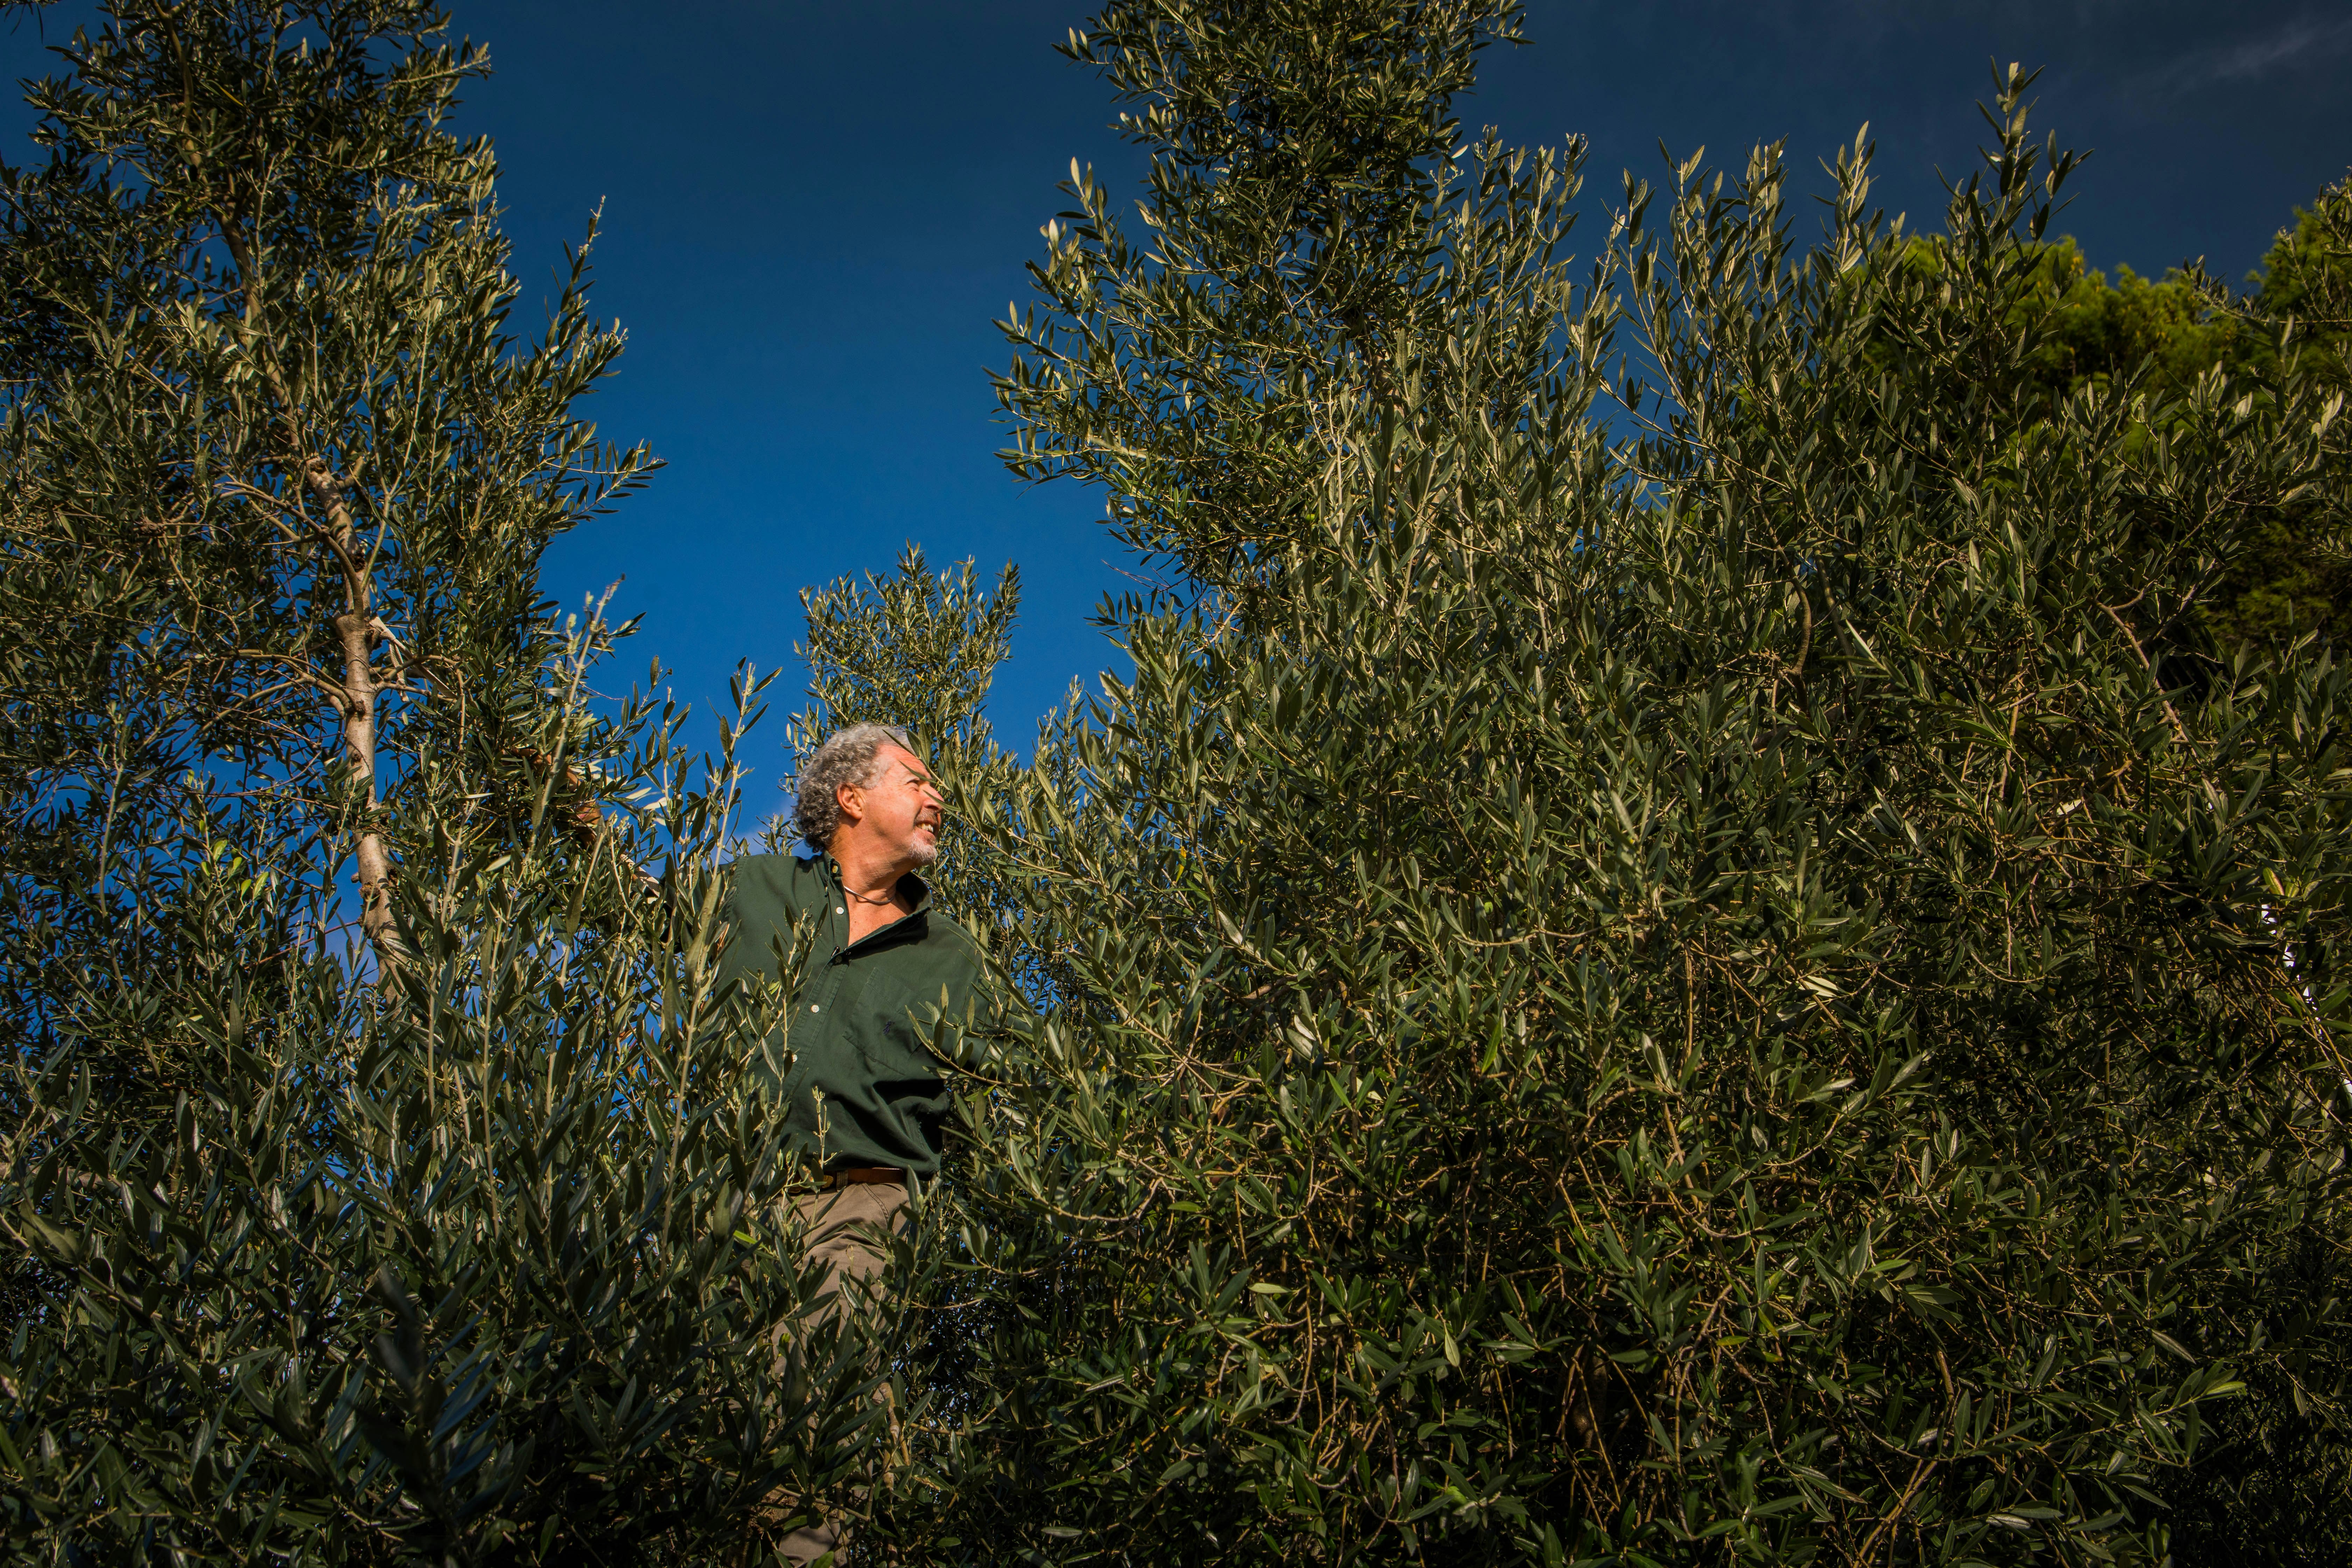 Carlo Spada, the writer's host, is a spry, tan man in a green button-down shirt with short, curly grey hair and khaki slacks. He is climbing an olive tree and looking to the viewer's right, densely surrounded by leaves and branches